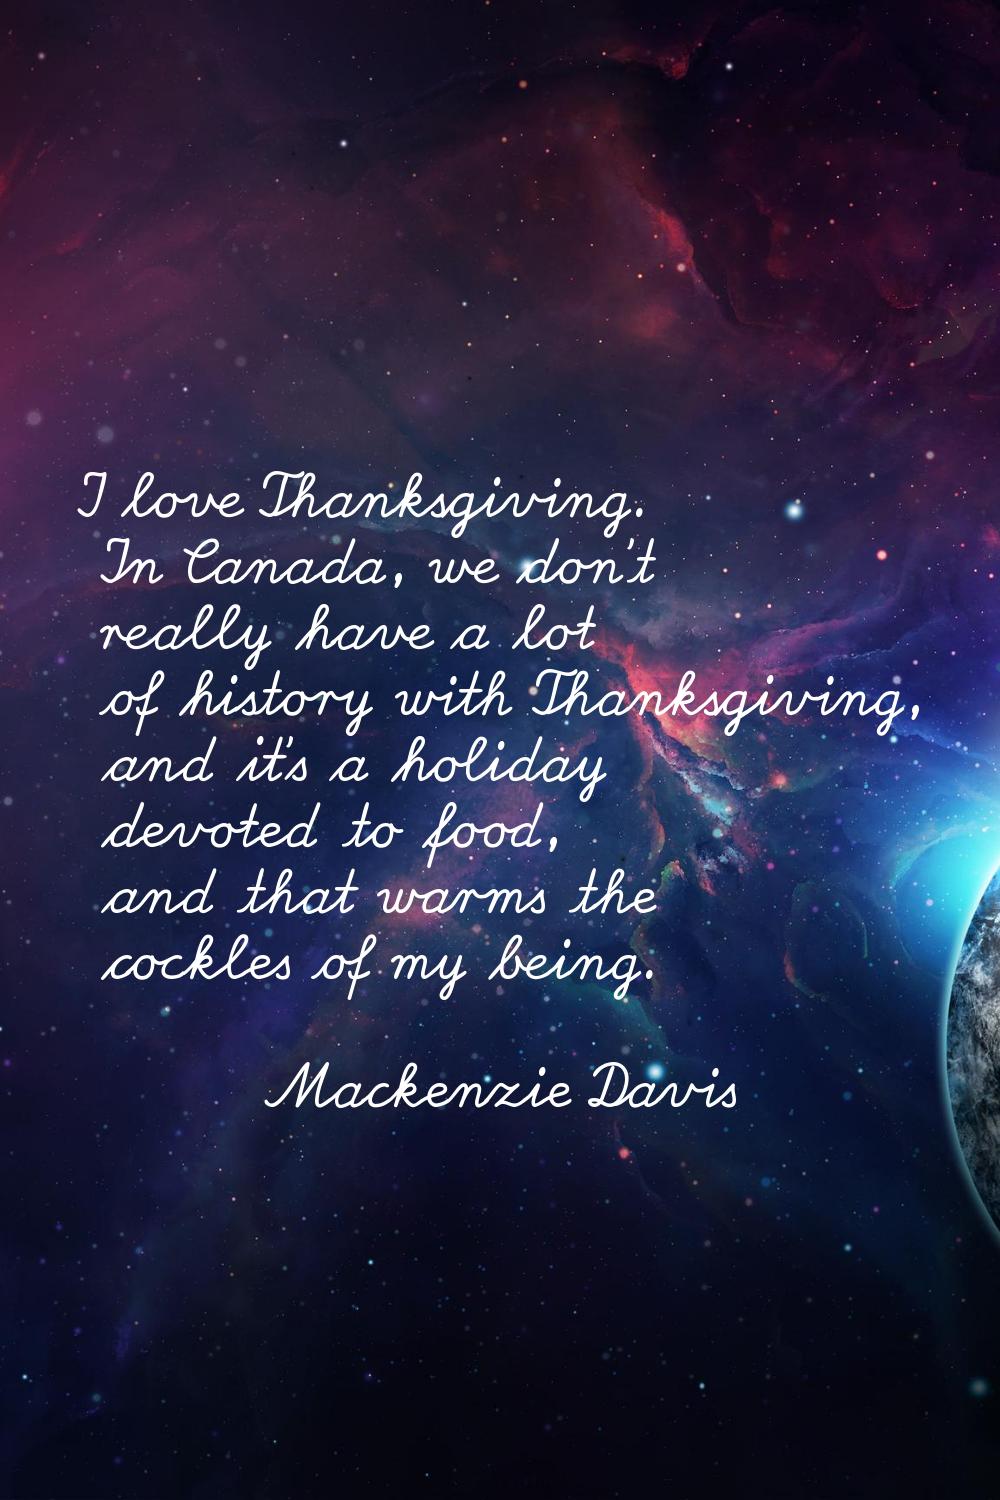 I love Thanksgiving. In Canada, we don't really have a lot of history with Thanksgiving, and it's a